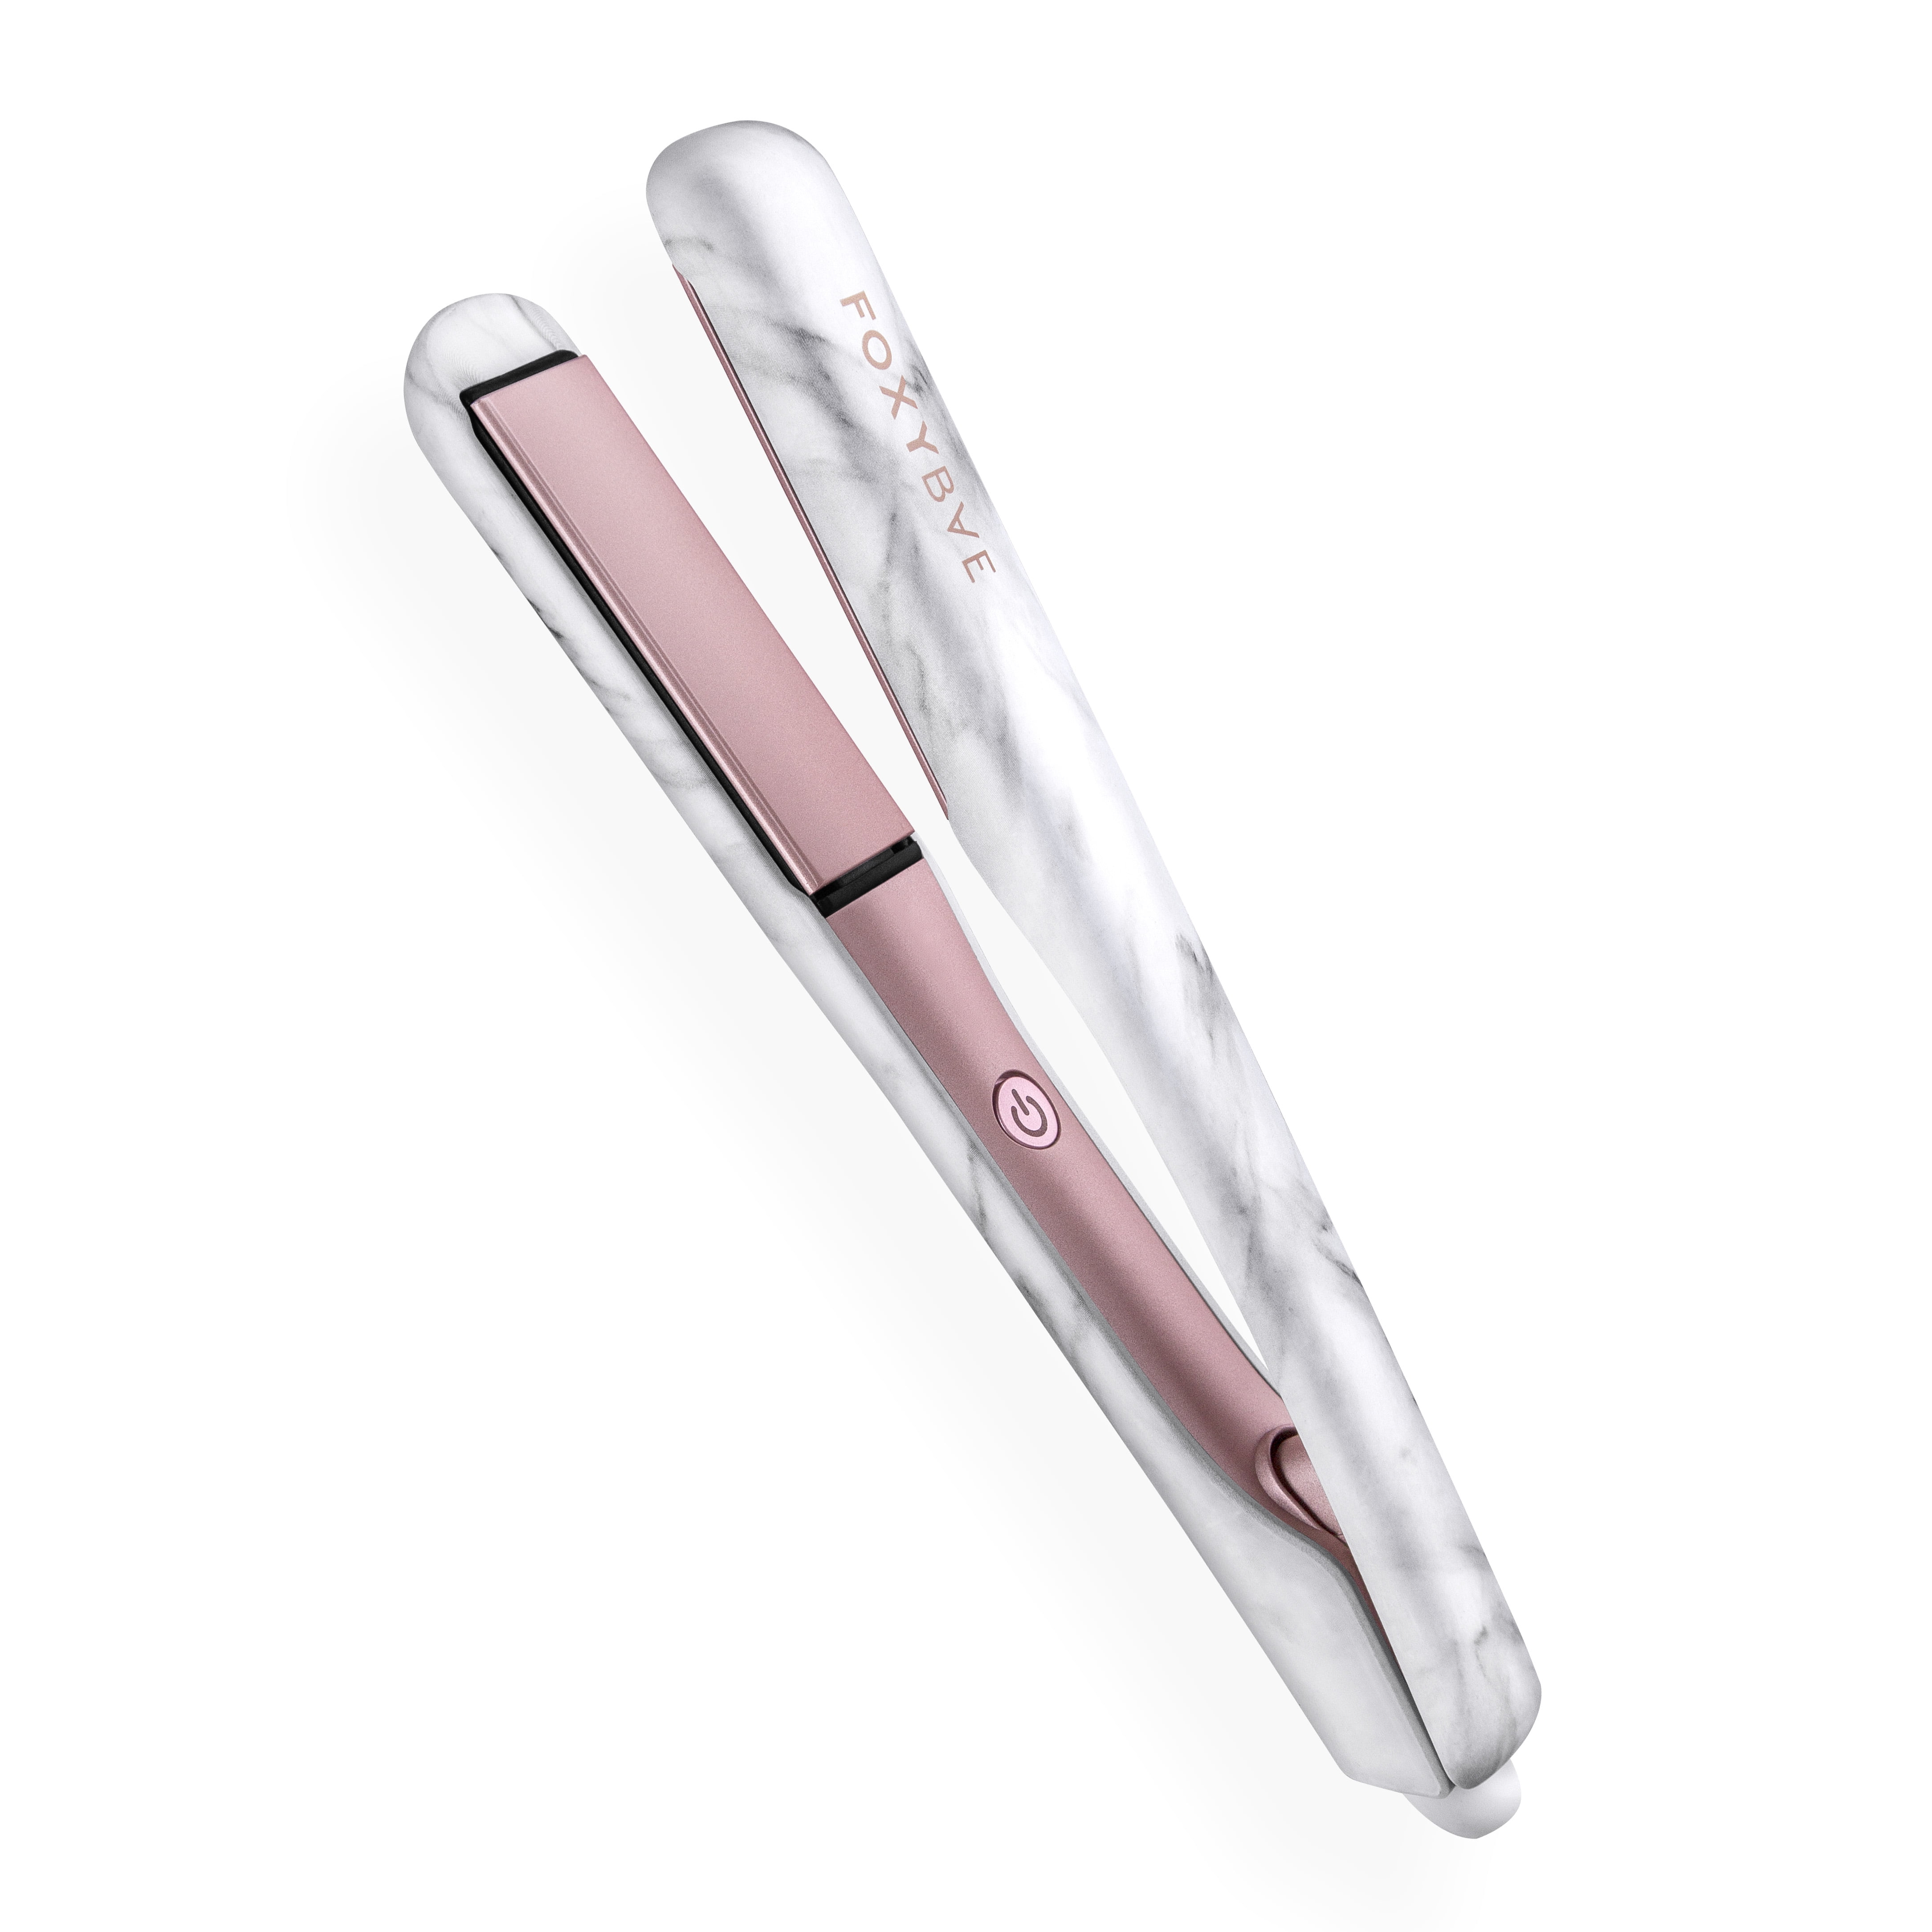 FoxyBae White Marble Rose Gold Flat Iron - Ceramic Tourmaline Technology - Hair  Straightener with Negative Ions - Straightens & Curls Hair - Professional  Salon Grade Hair Styling Tool (